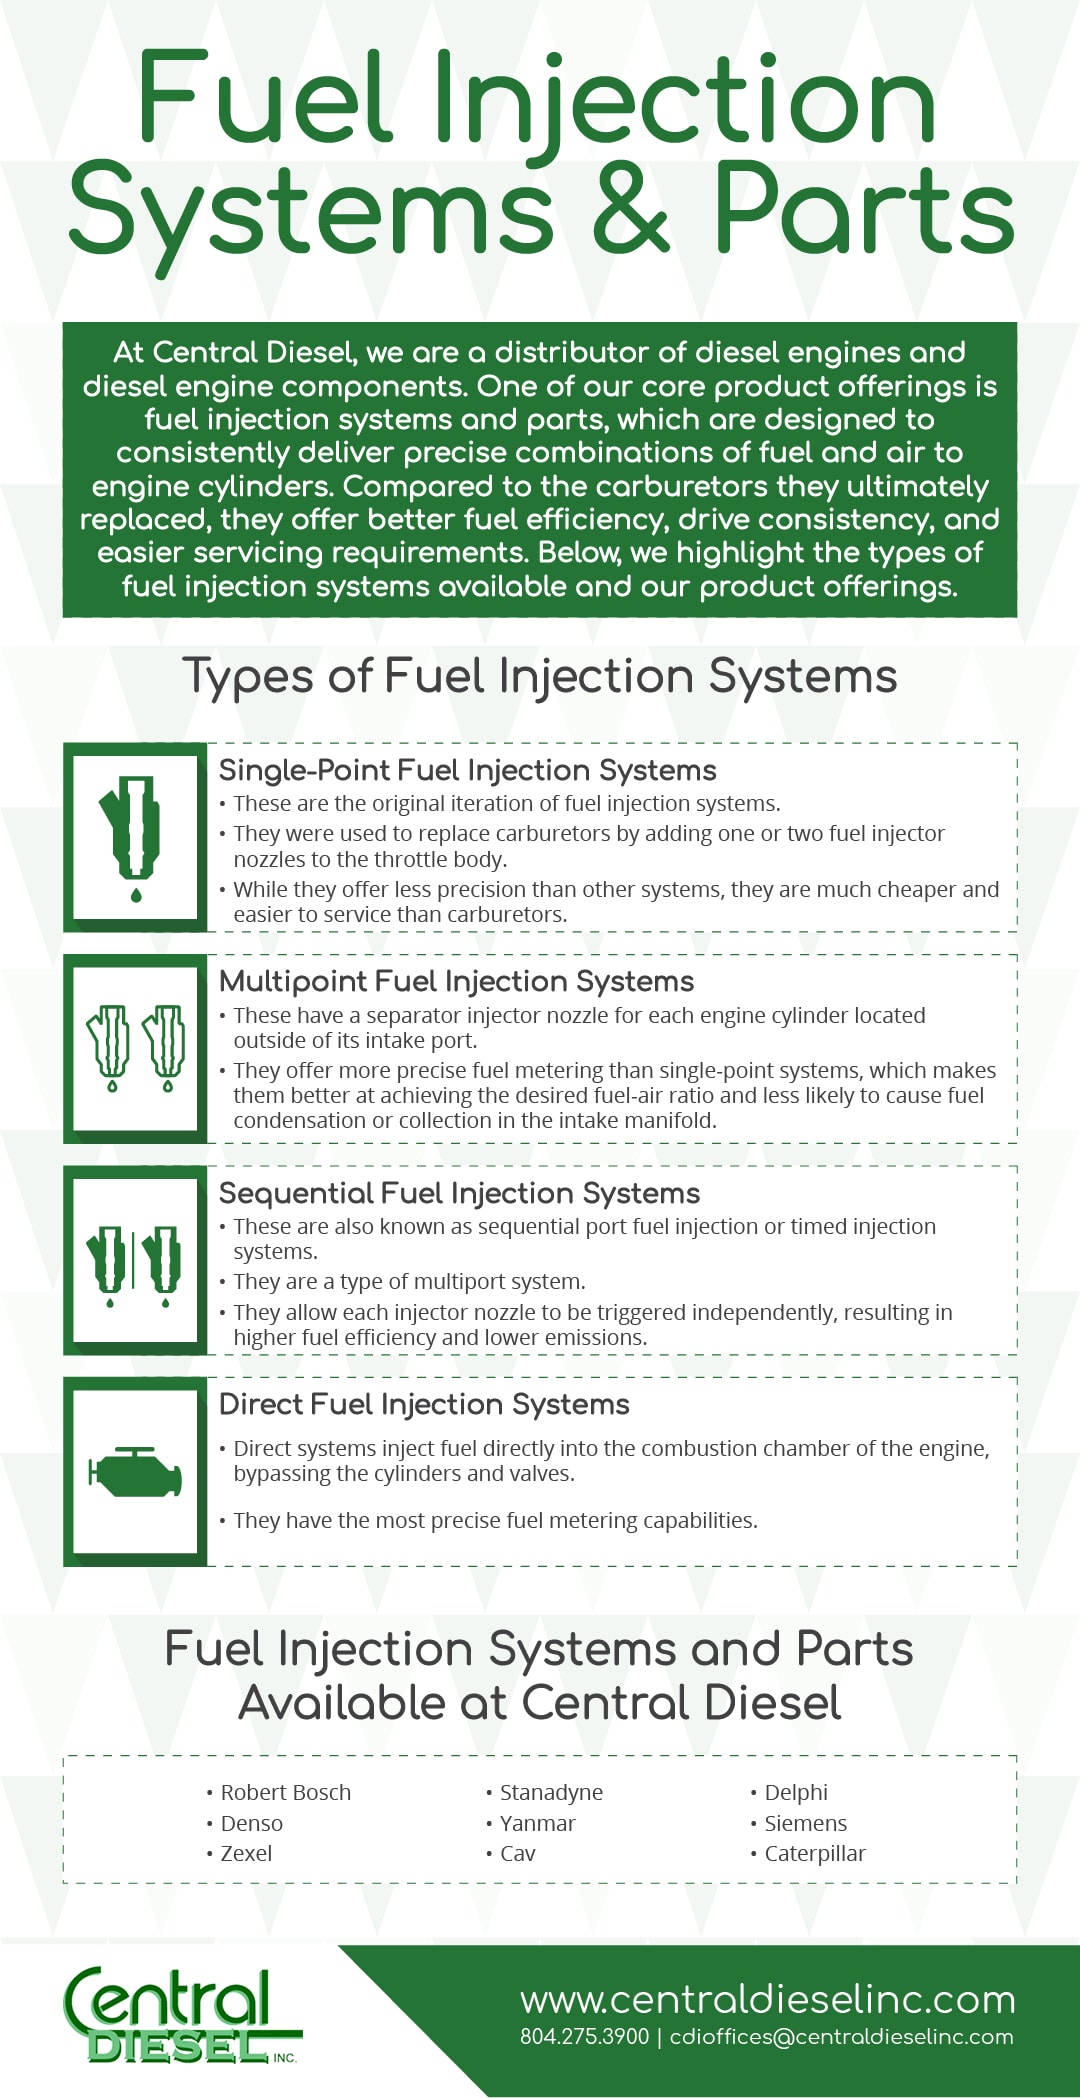 Fuel Injection Systems and Parts